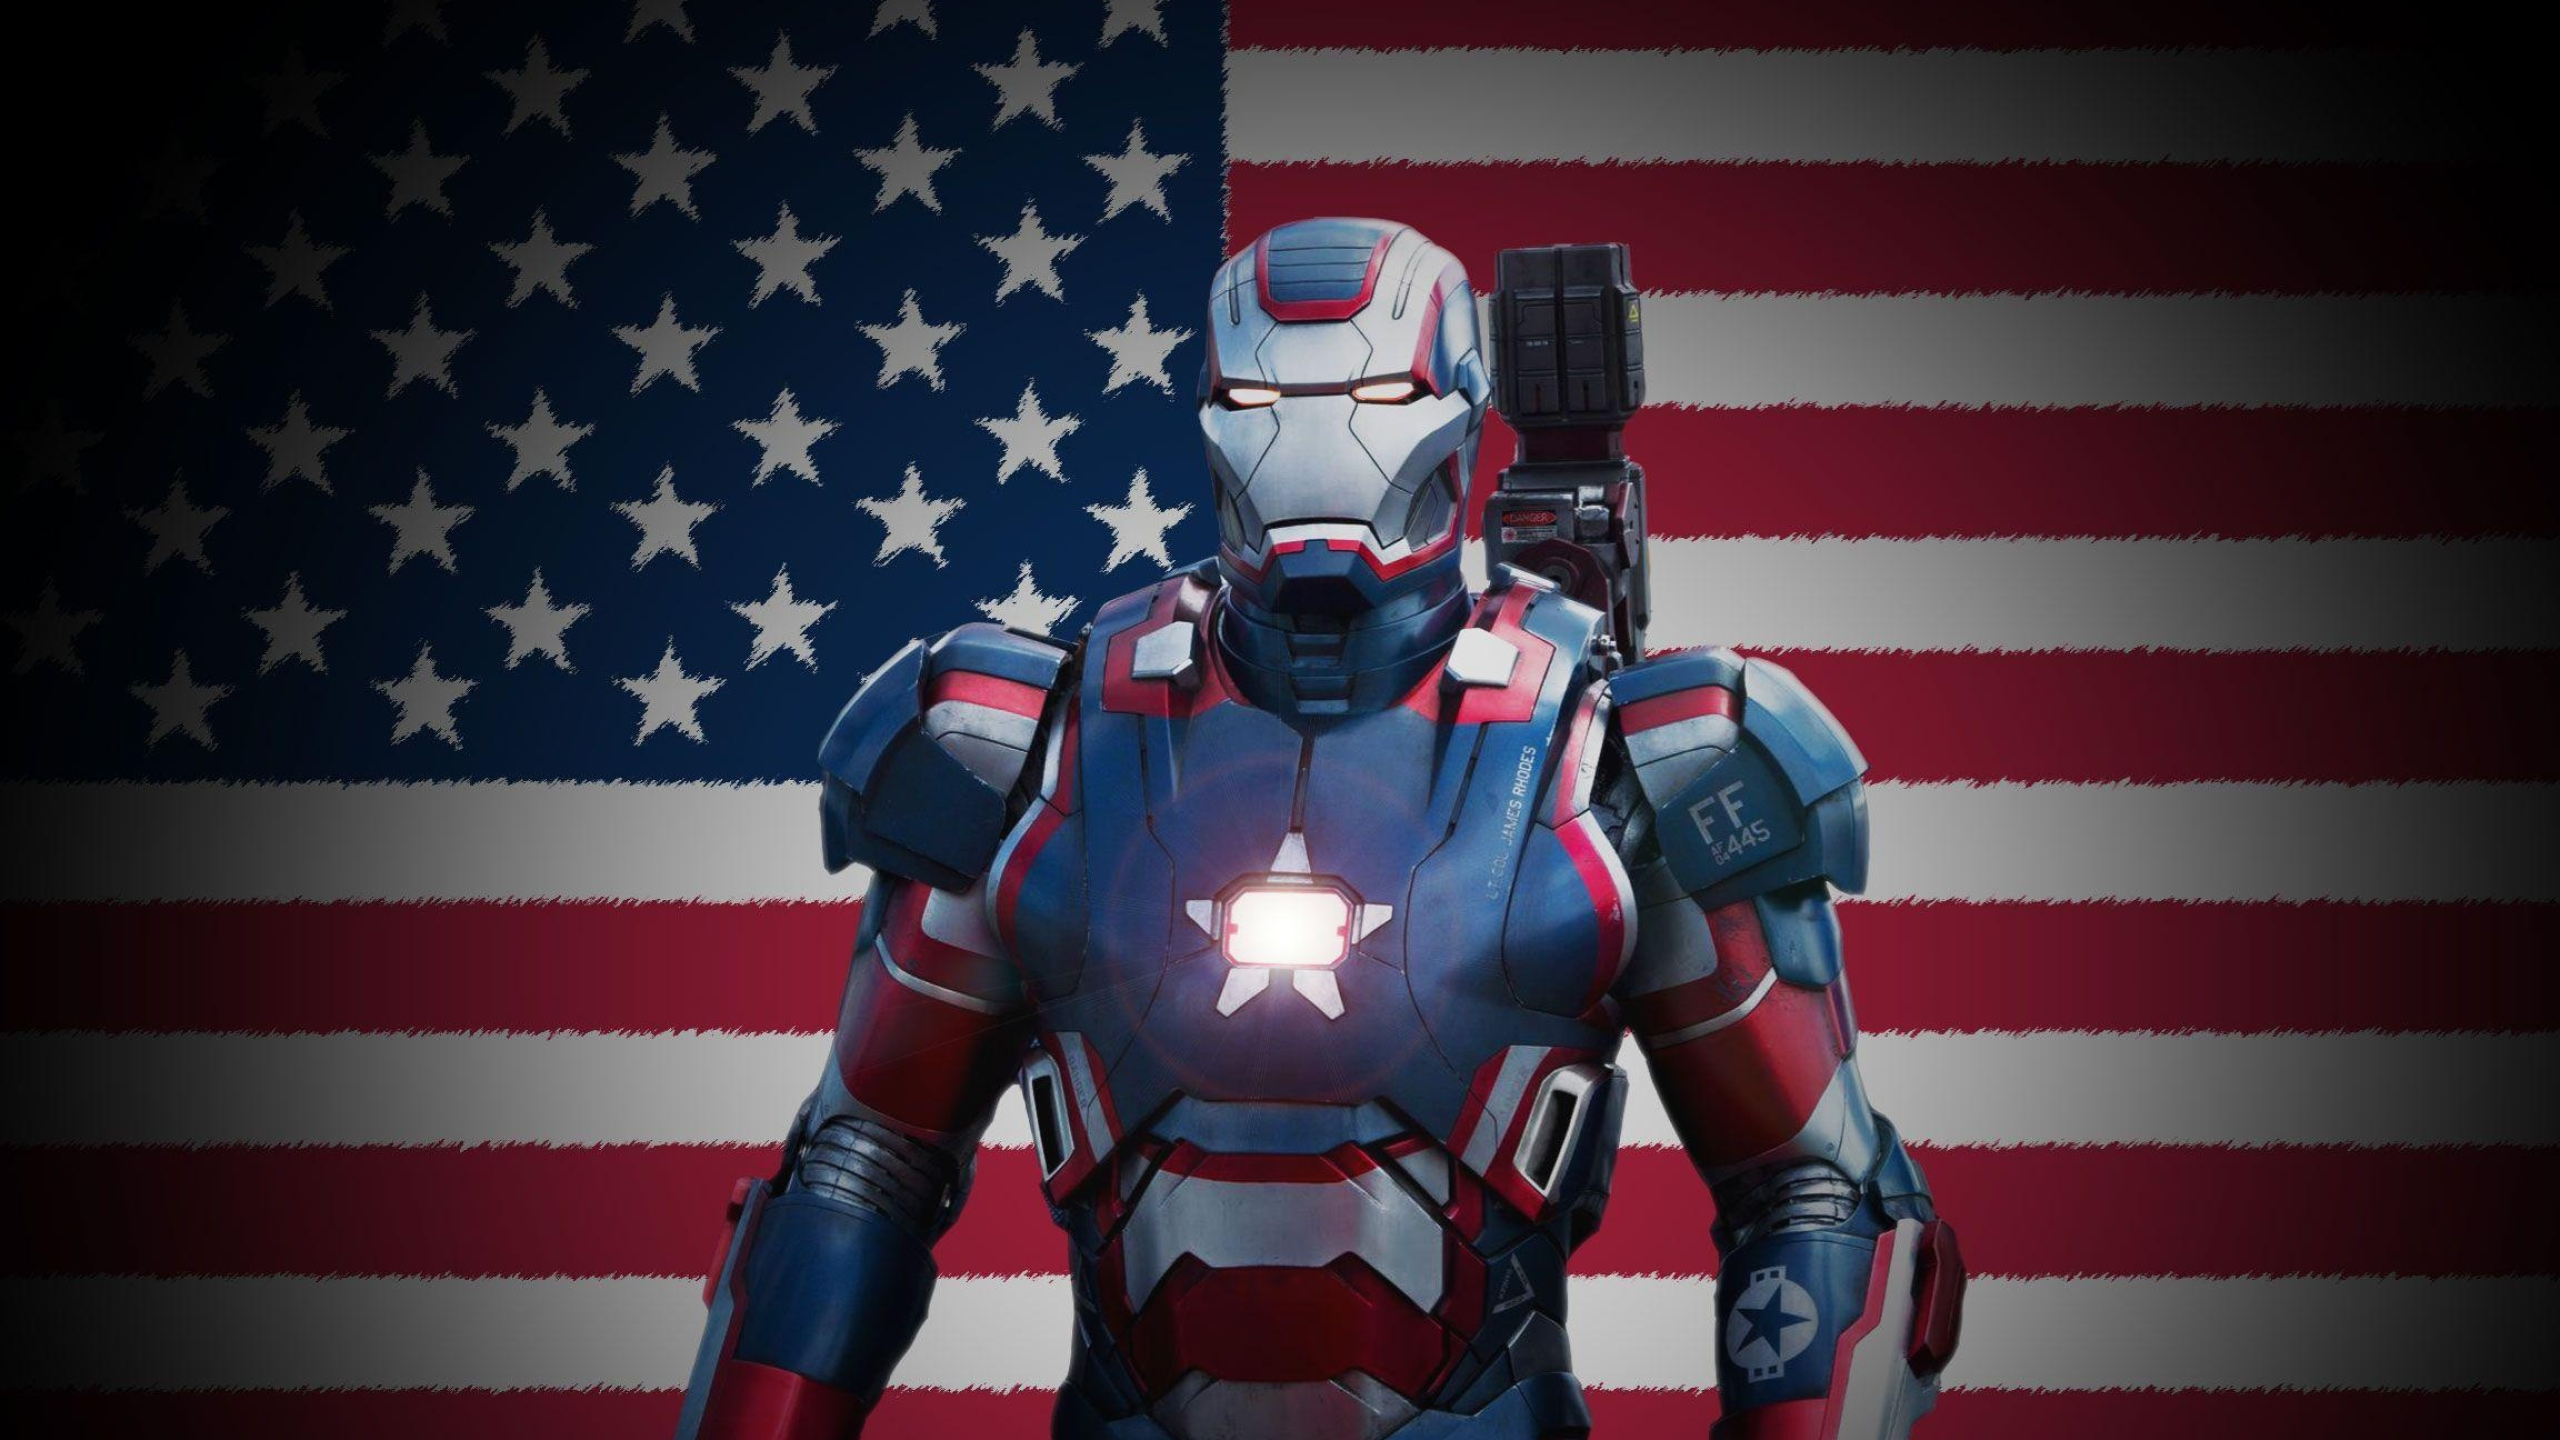 Iron Patriot wallpapers, images, HD backgrounds, Iron Patriot's iconic look, 2560x1440 HD Desktop